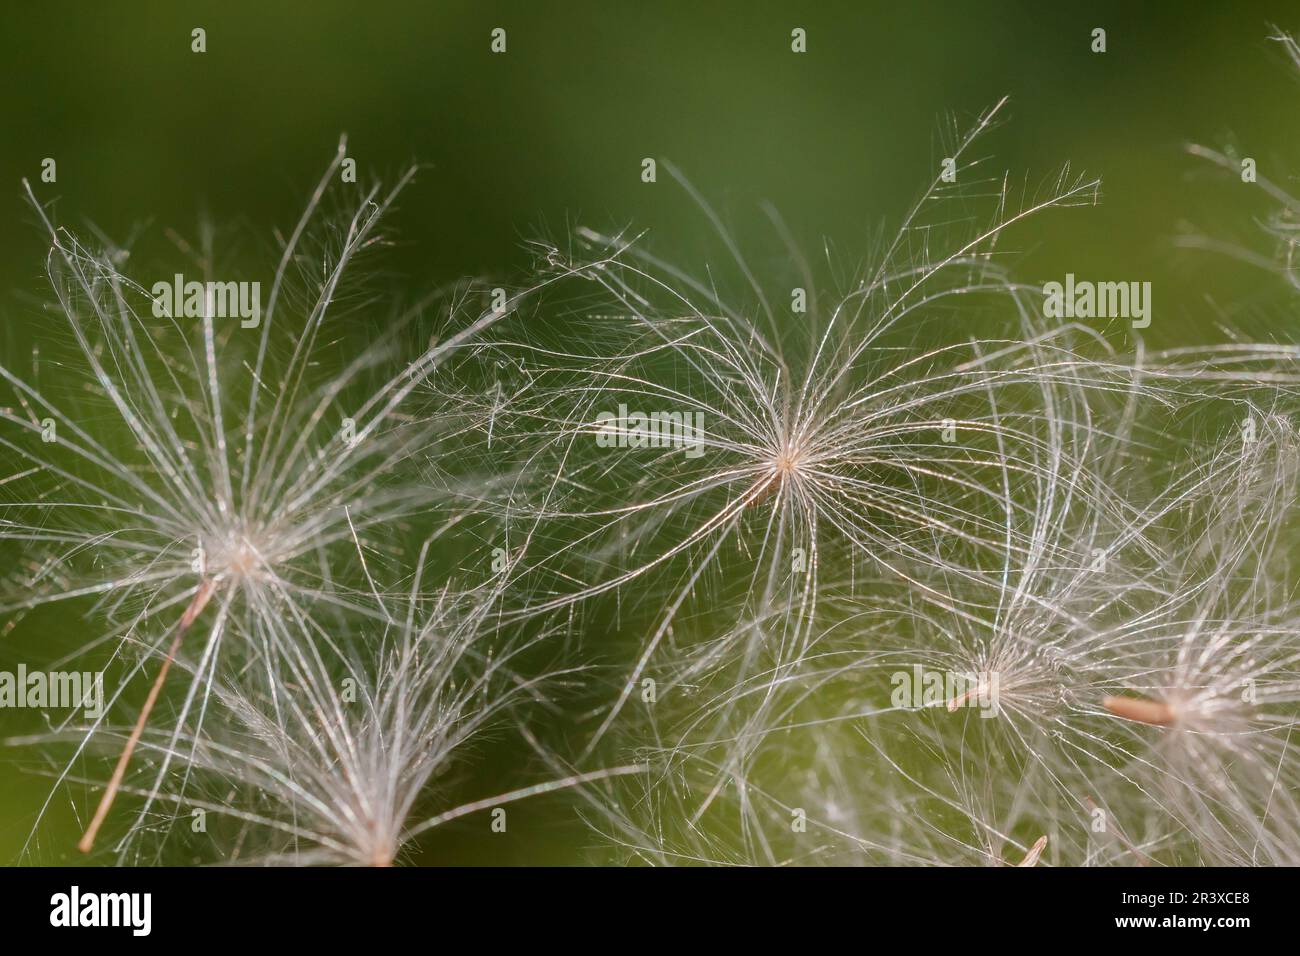 Leontodon, commonly known as the Dandelion, Seed-head Stock Photo